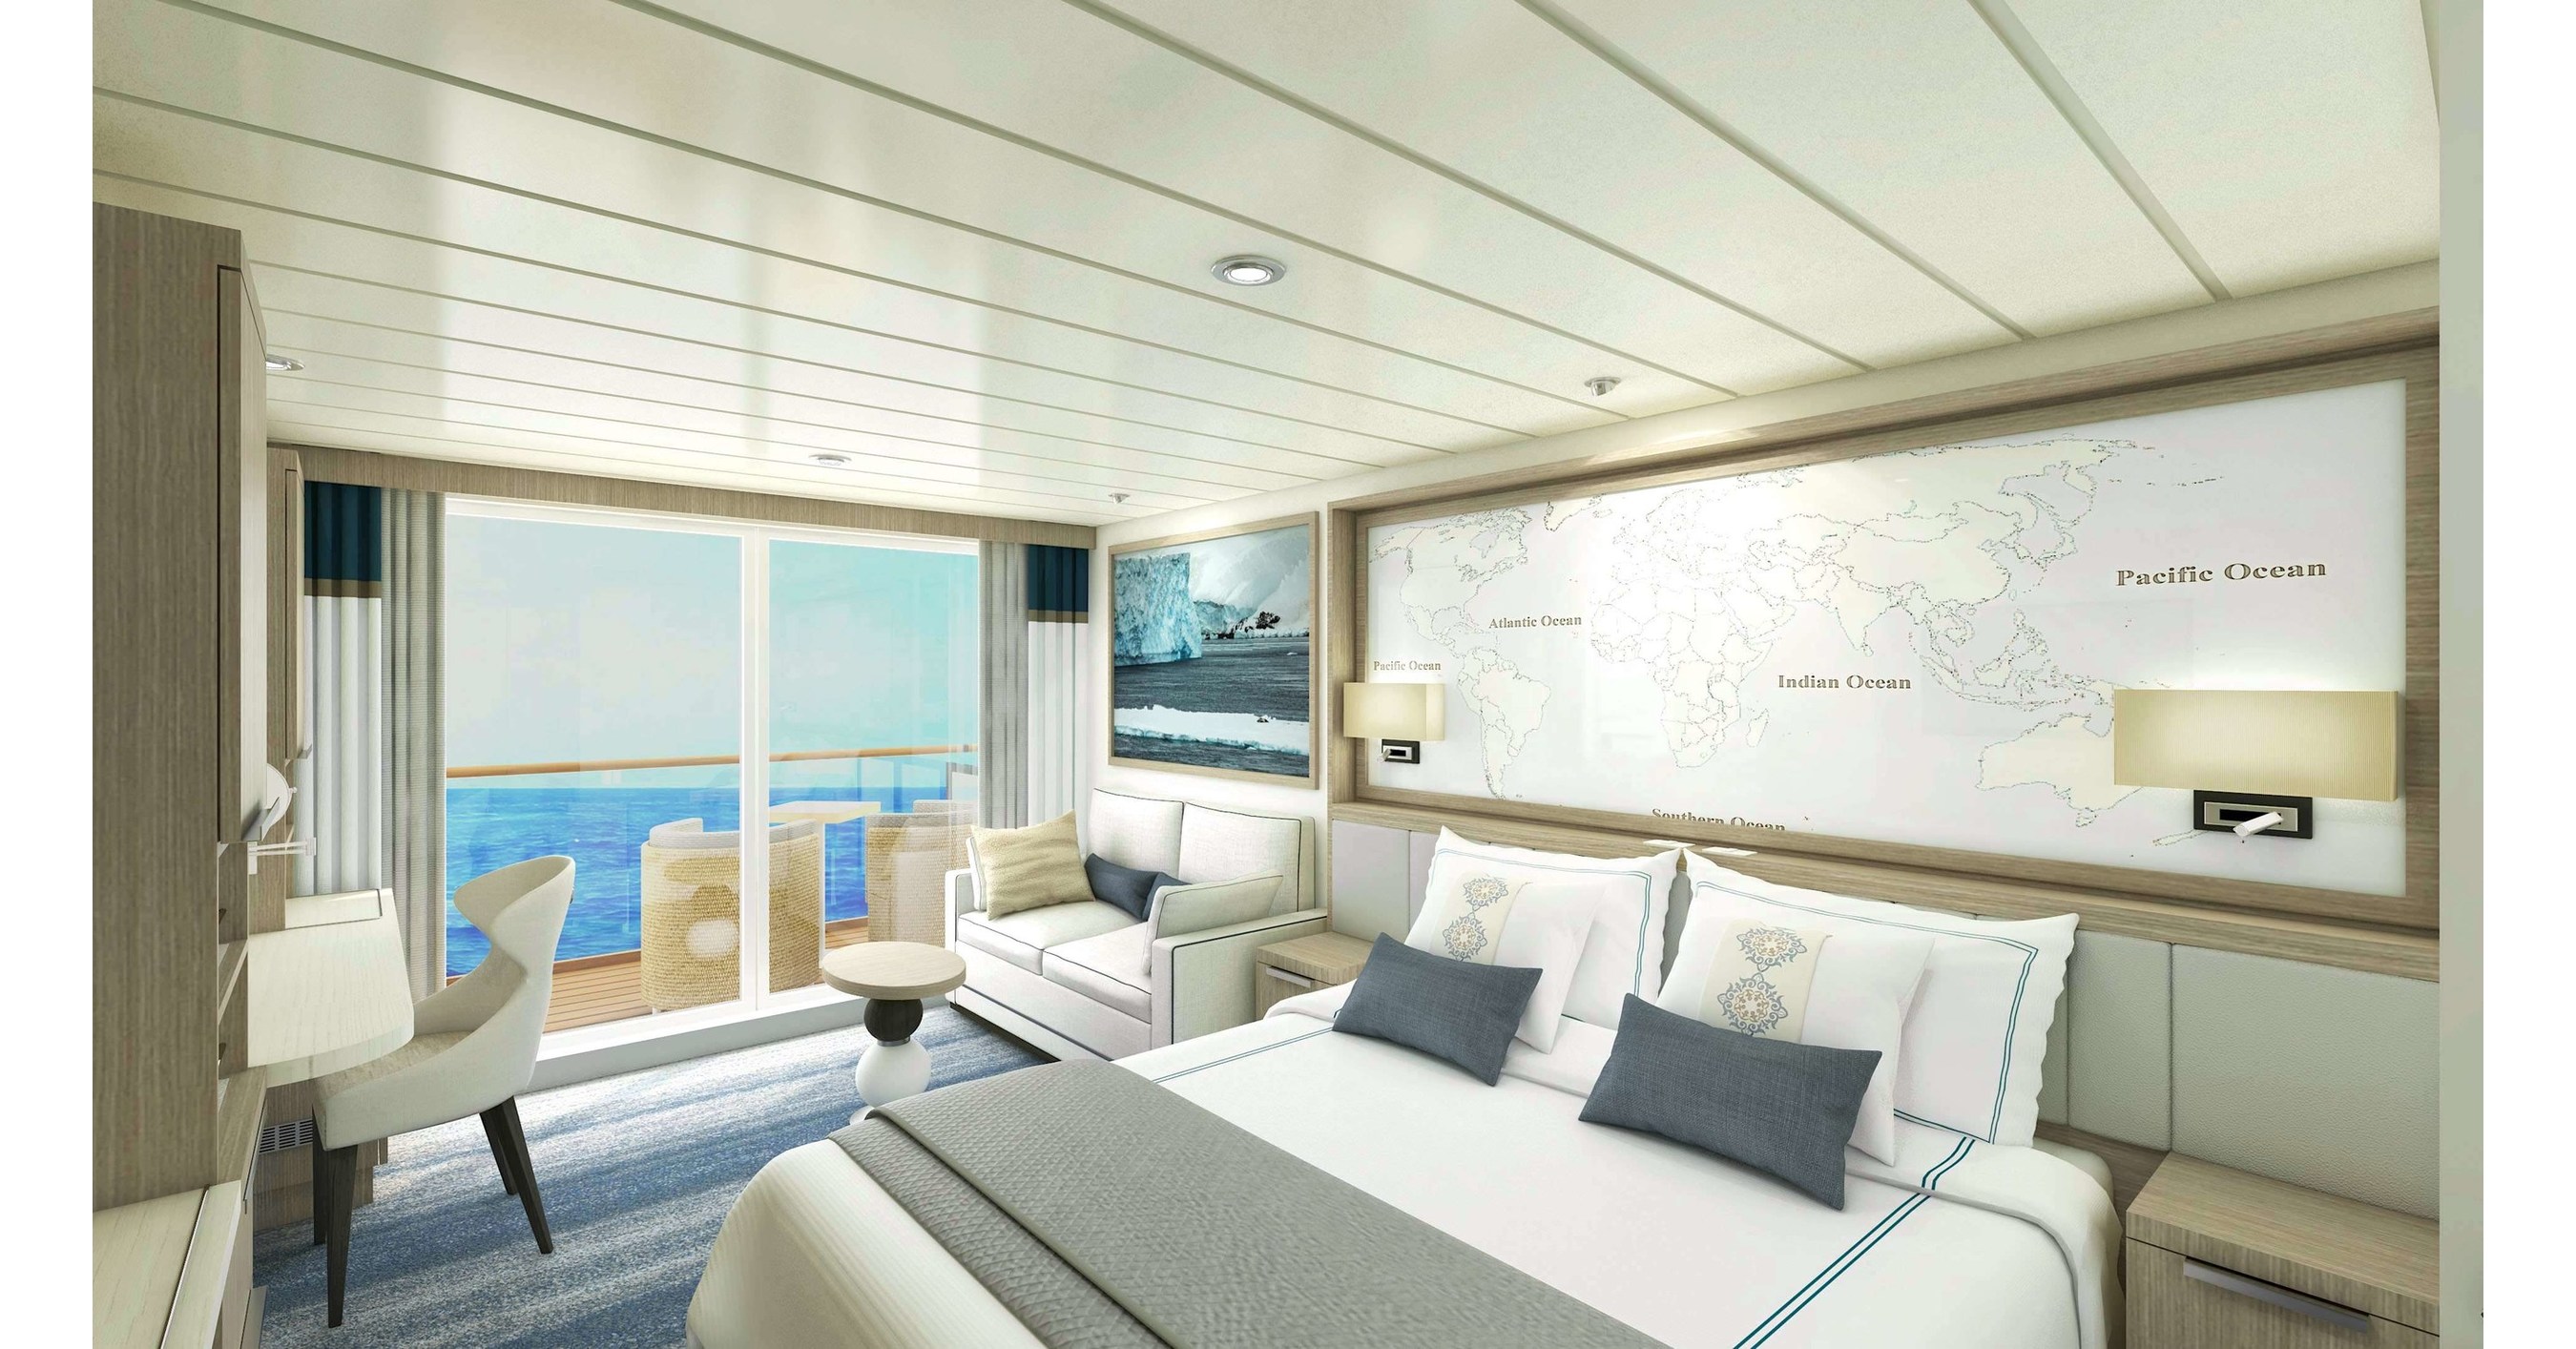 Vantage Travel Adds Second 5star Small Ship